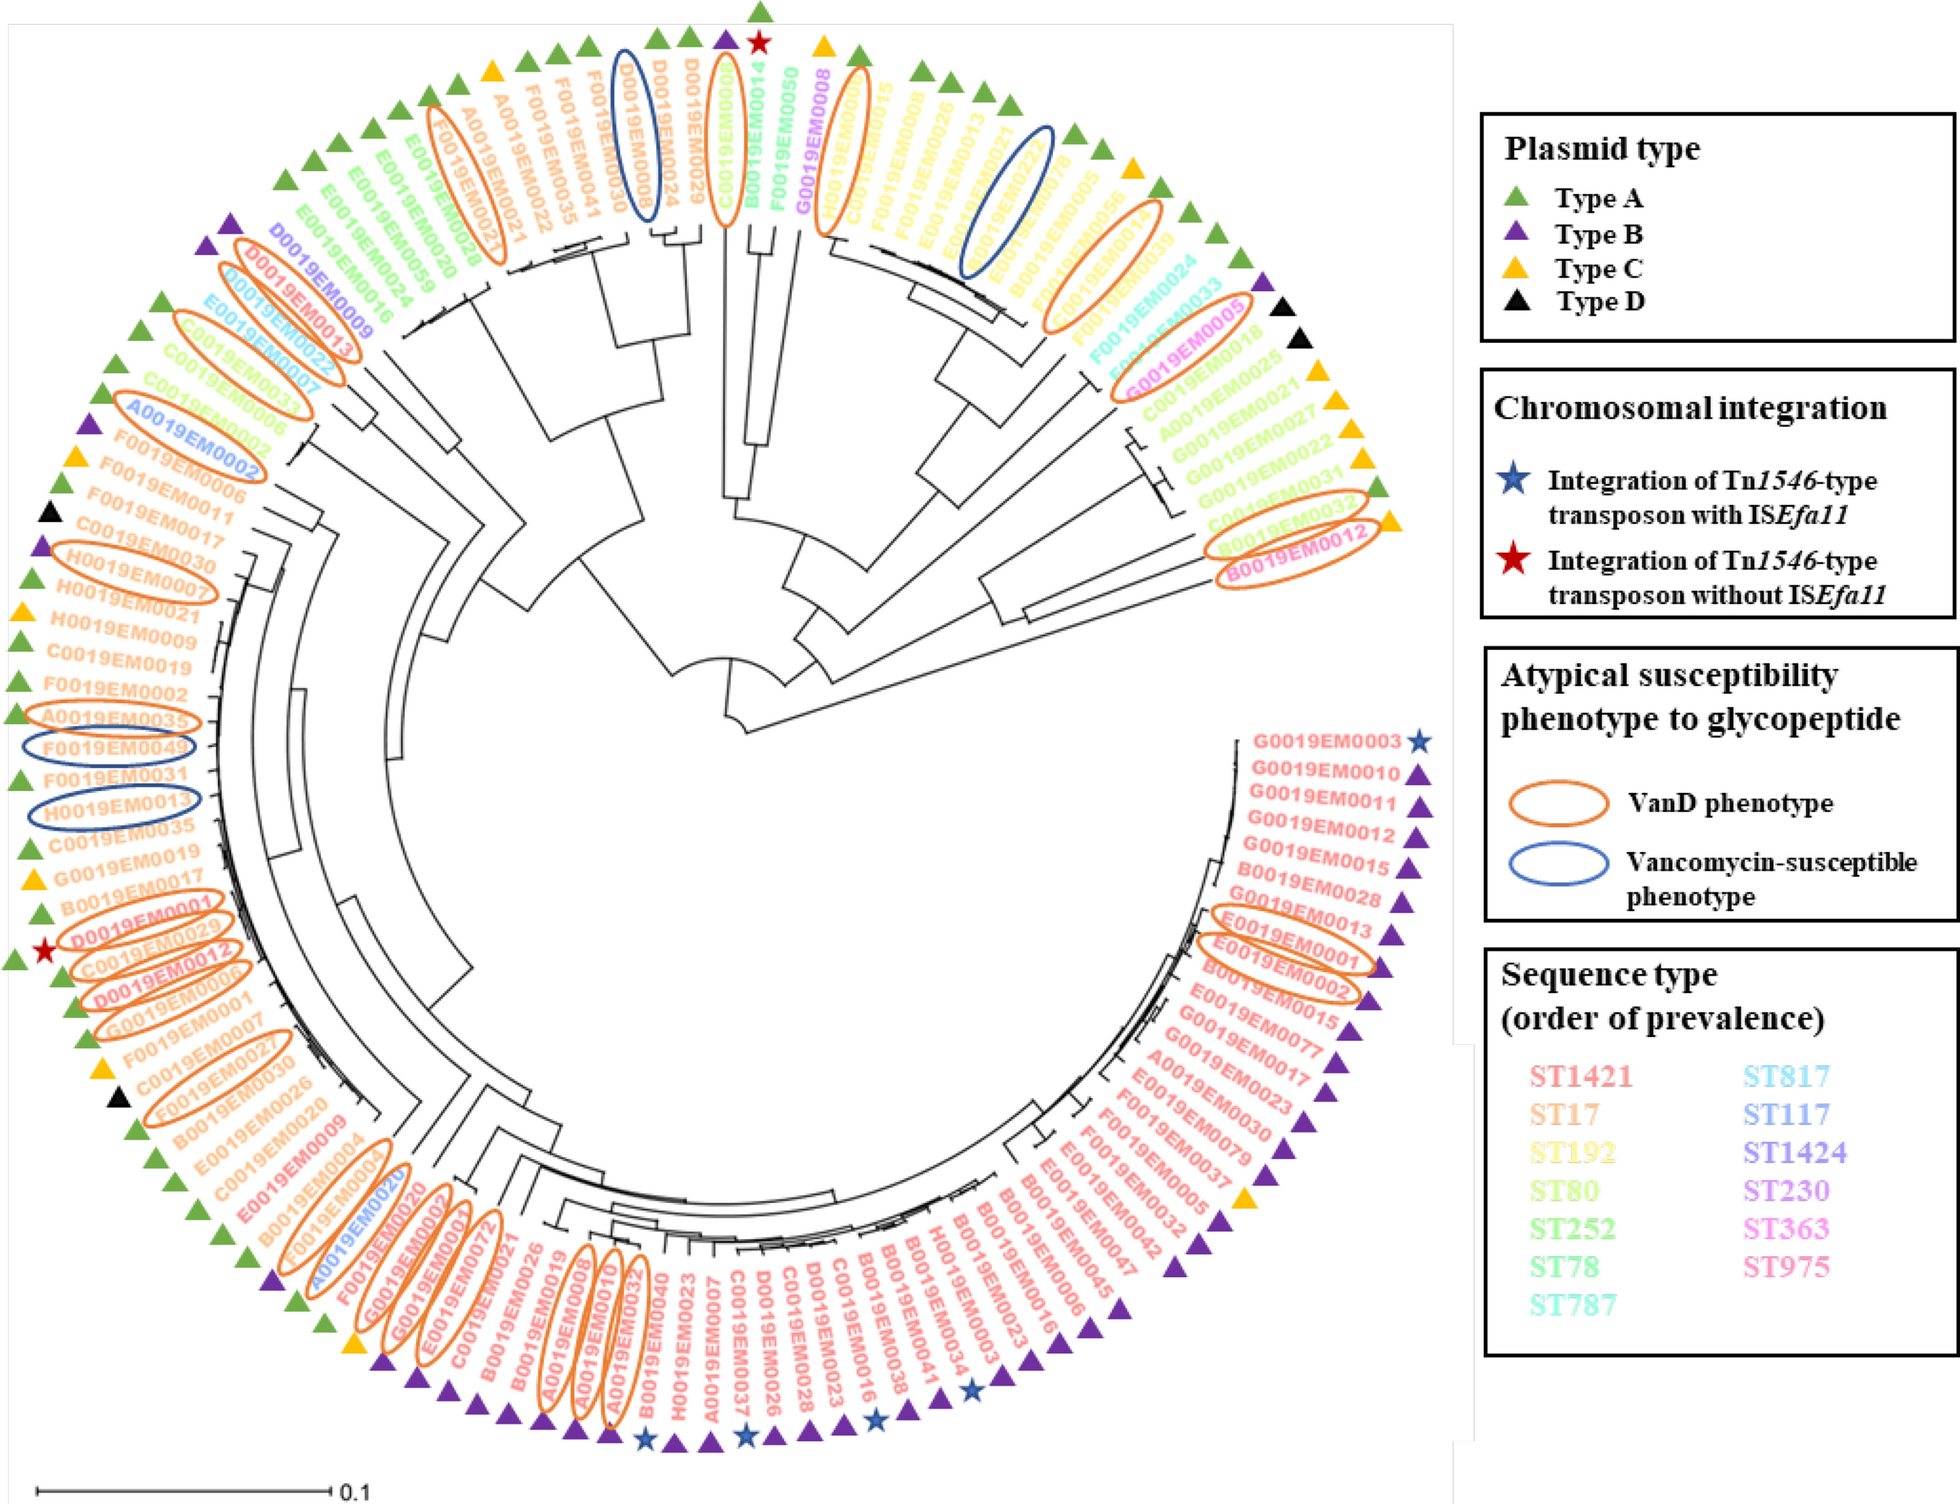 Fitness costs of Tn1546-type transposons harboring the vanA operon by plasmid type and structural diversity in Enterococcus faecium